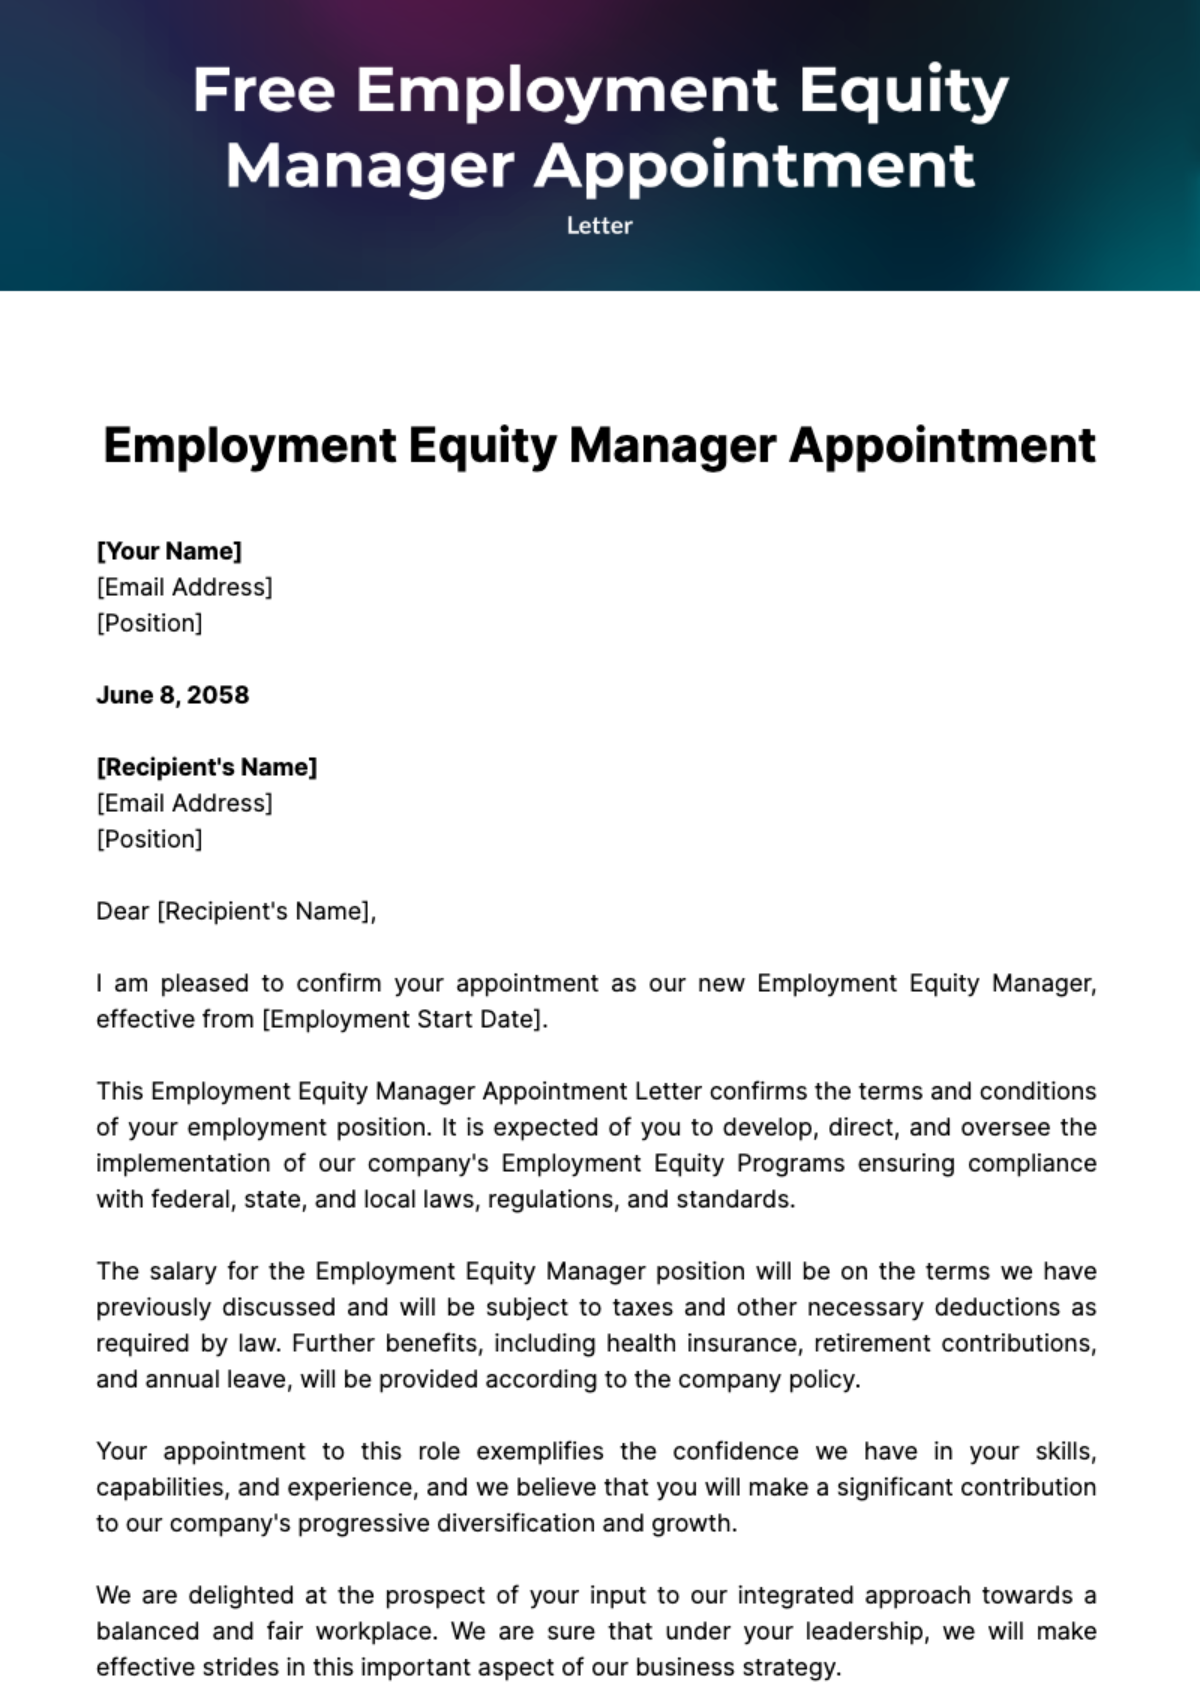 Free Employment Equity Manager Appointment Letter Template